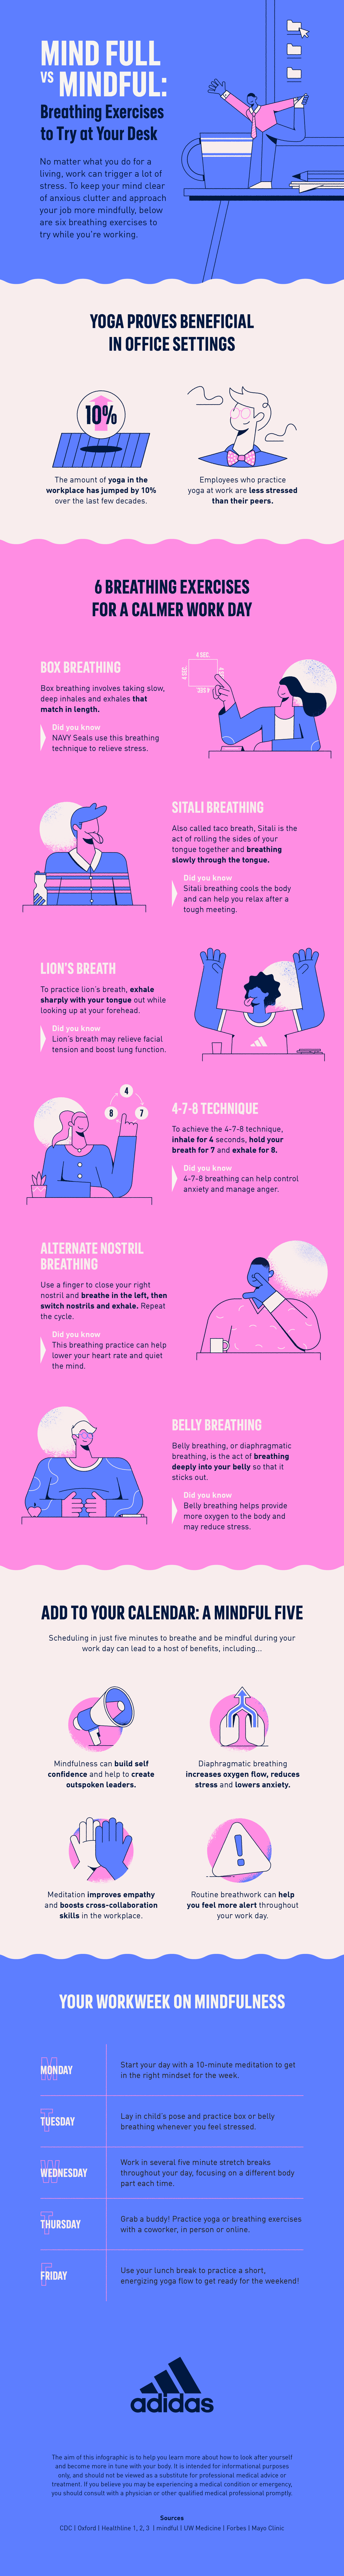 Adidas infographic on the importance of workplace mindfulness and the power of breathing